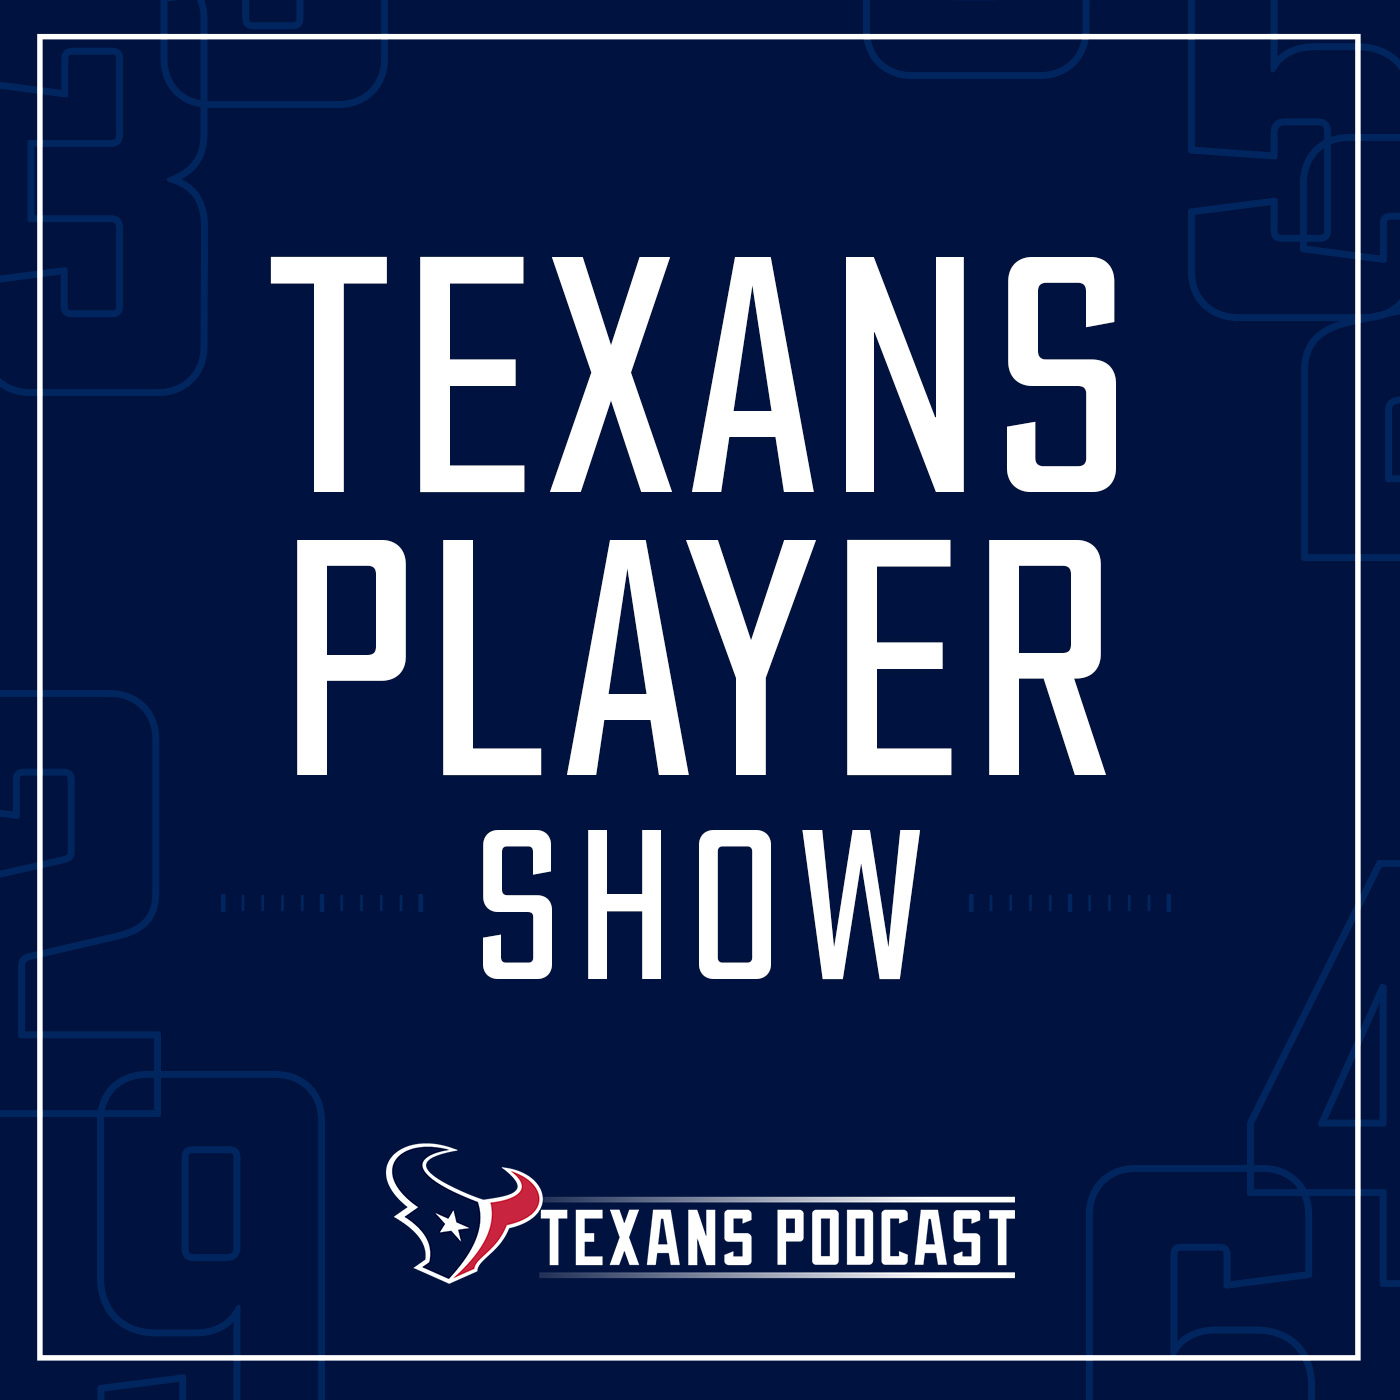 Detroit, stand up! DB Desmond King & FB Troy Hairston | Texans Player Show